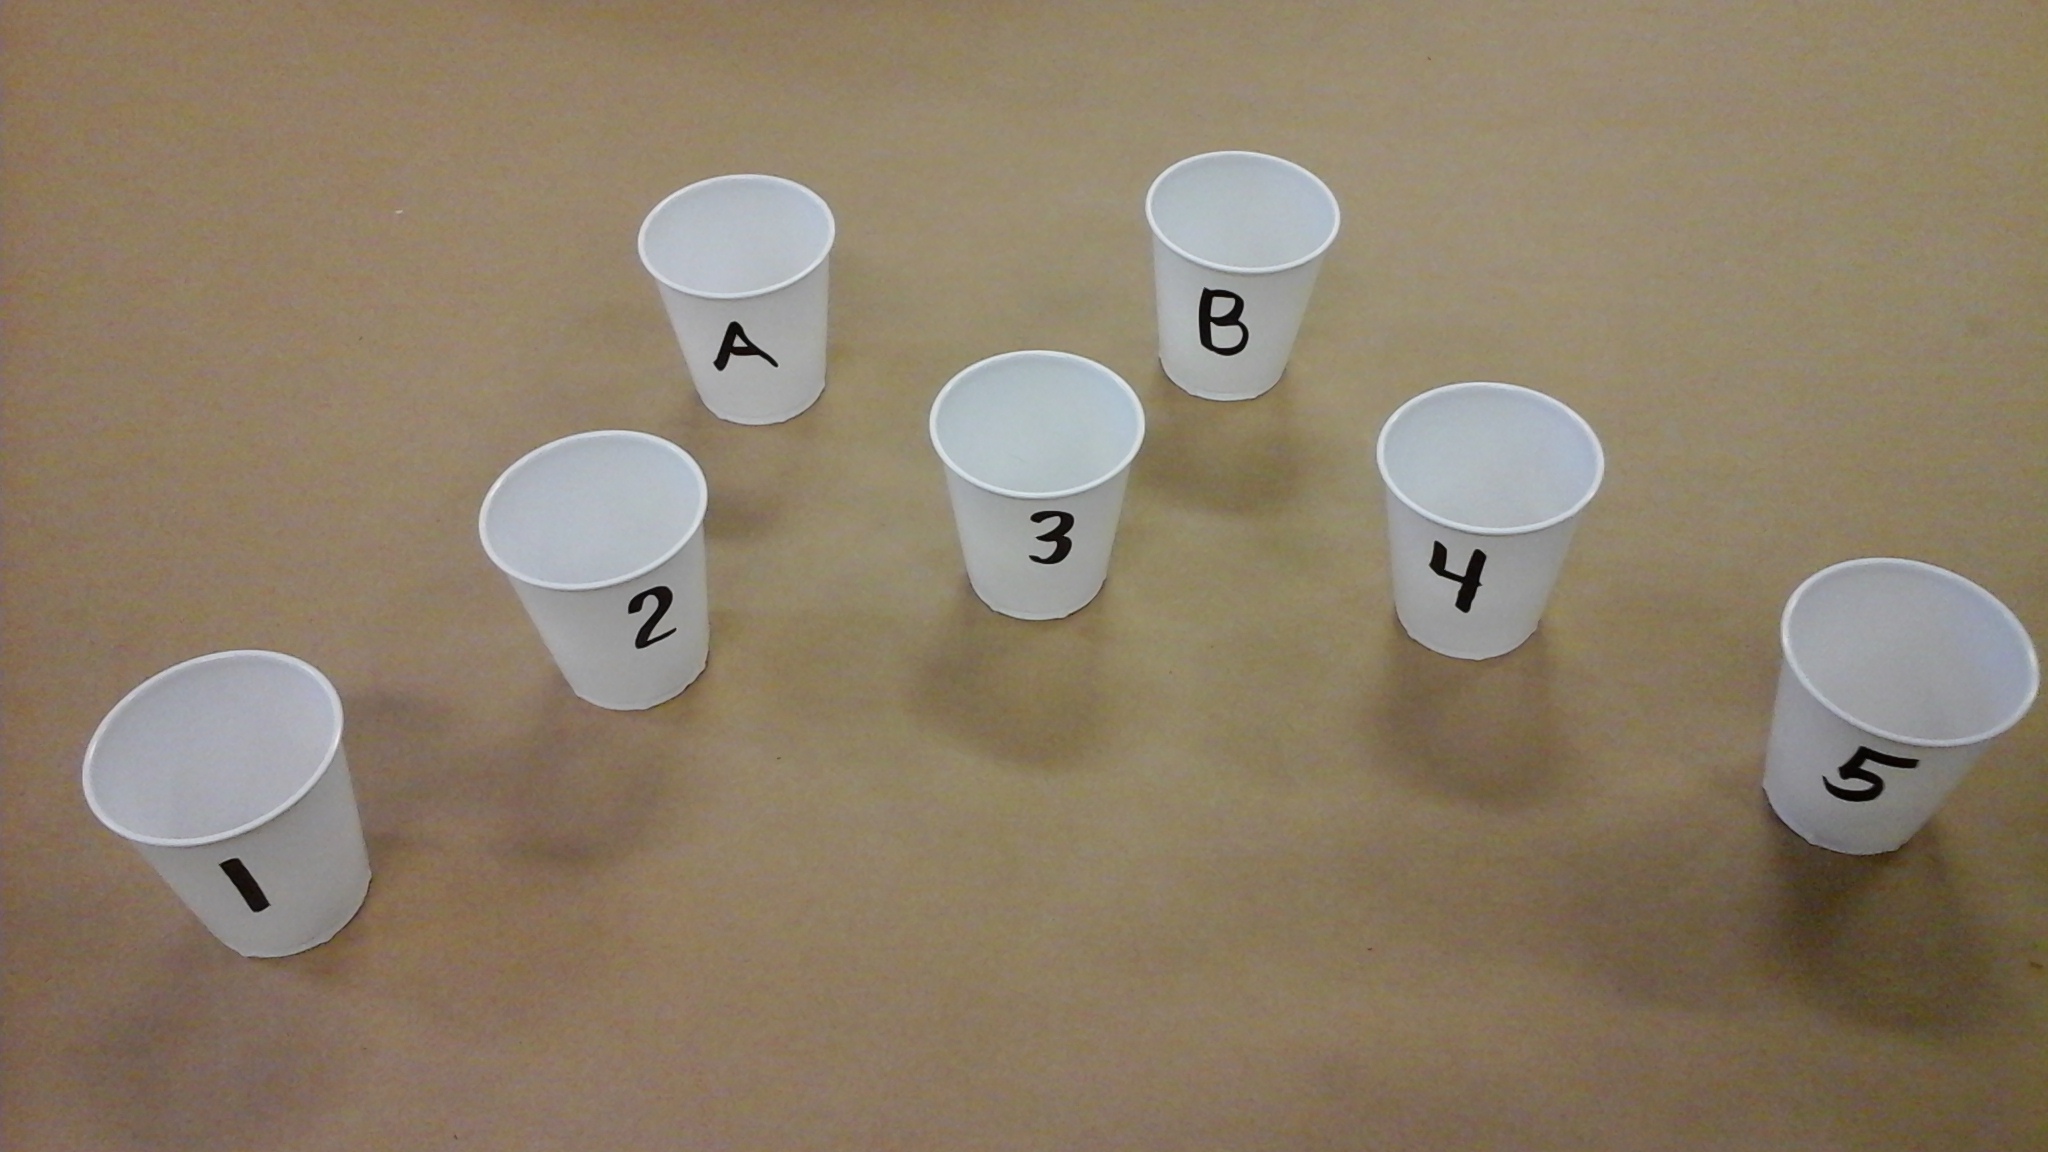 cups on table labeled with letters and numbers